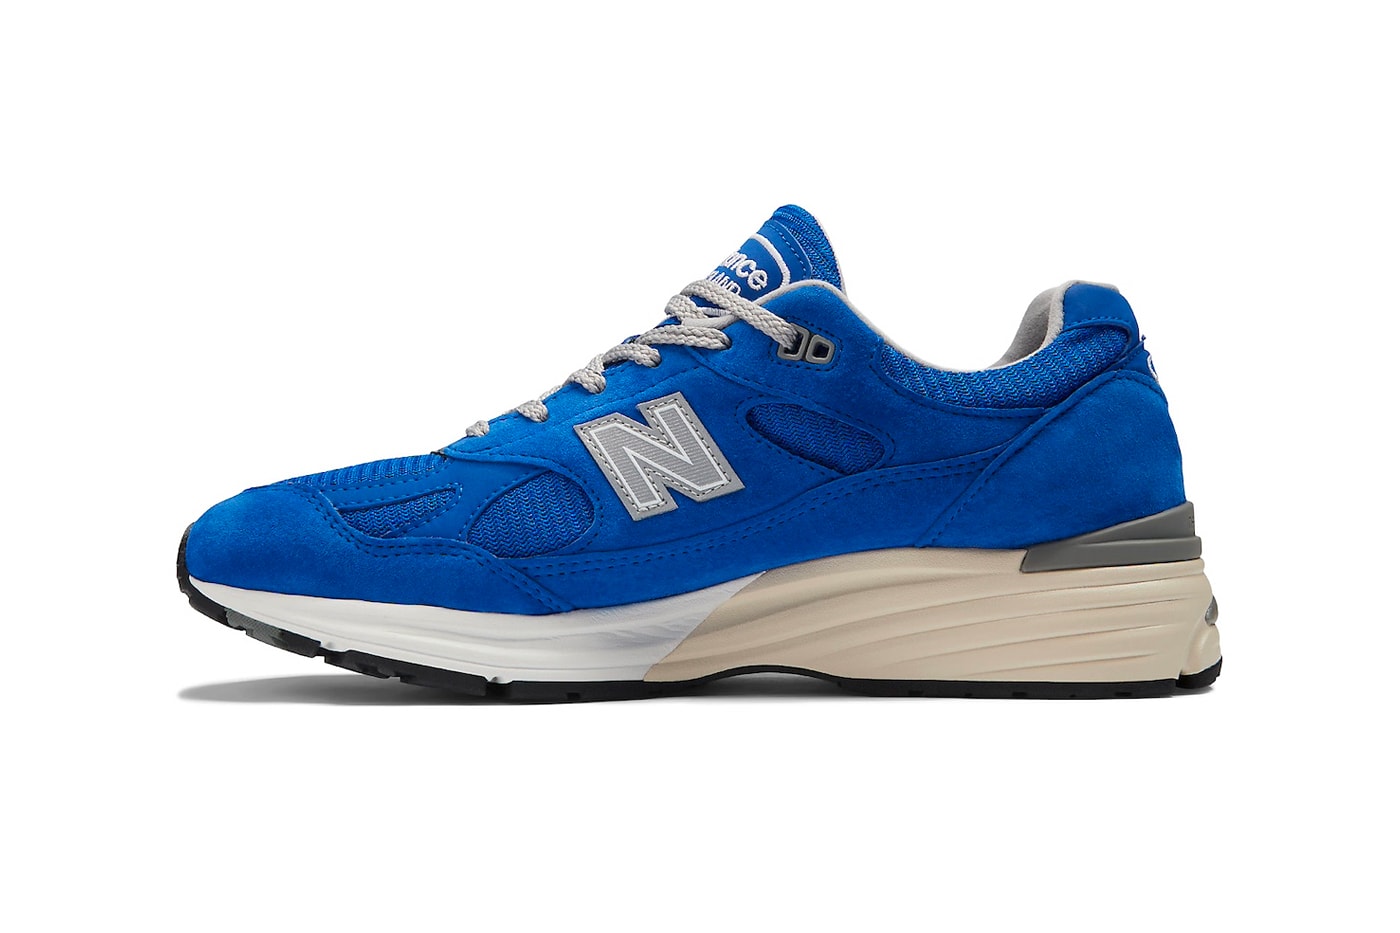 Official Look at the New Balance 991v2 Made in UK "Blue" Silver Blue/Turbulence-Quiet Grey U991BL2